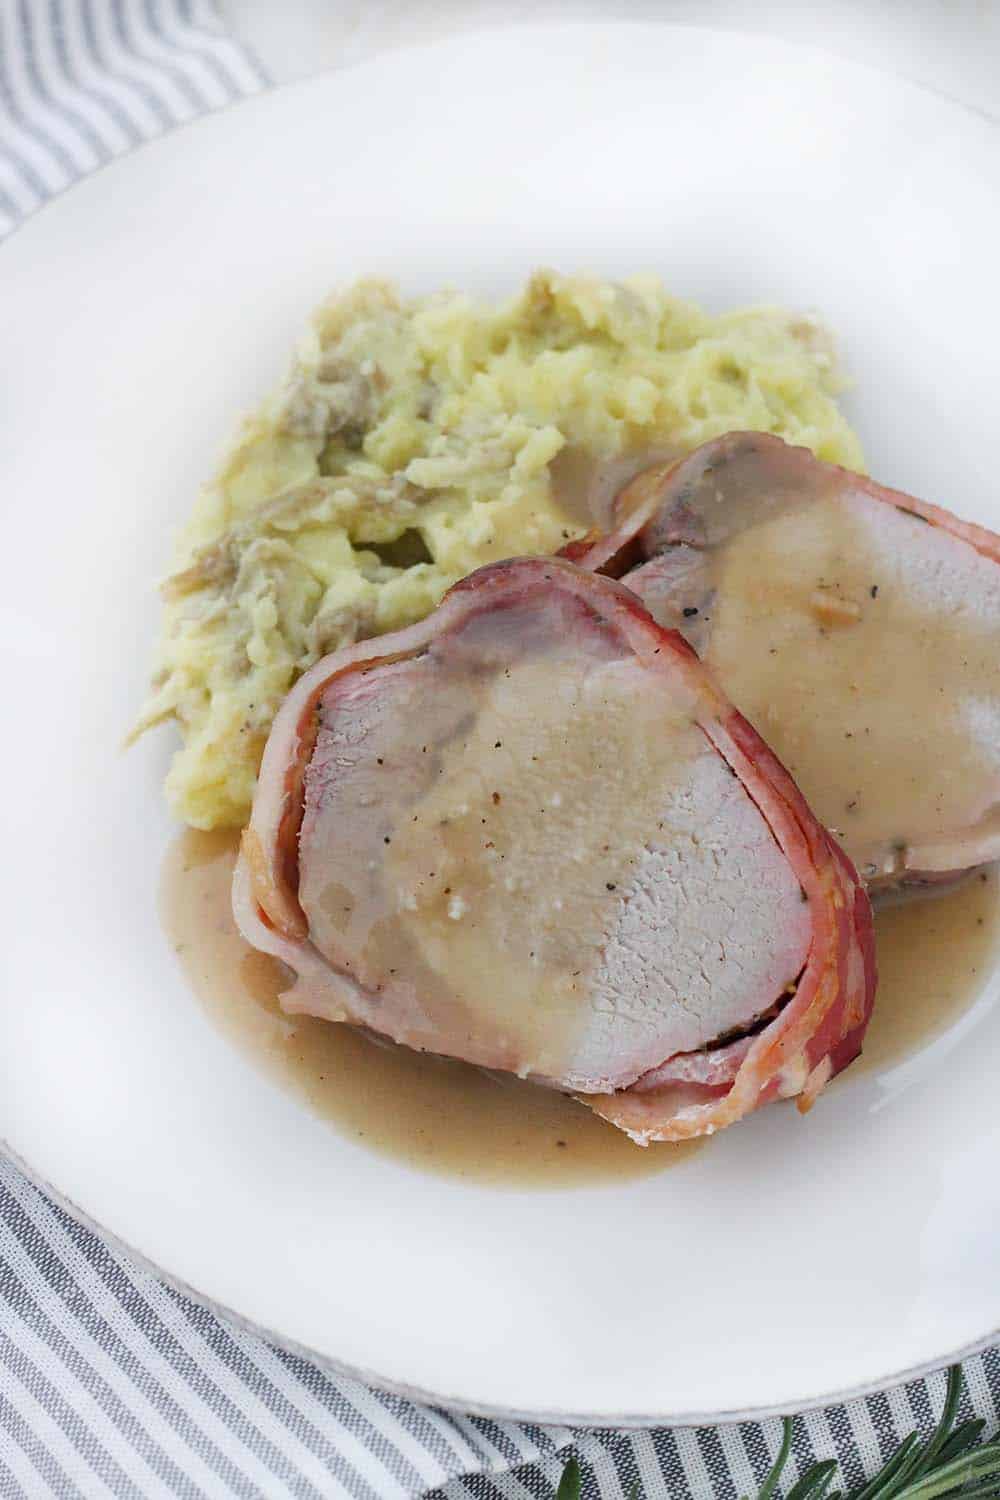 Roasted Bacon Wrapped Pork Loin served with Mashed Potatoes and Apple Cider Gravy